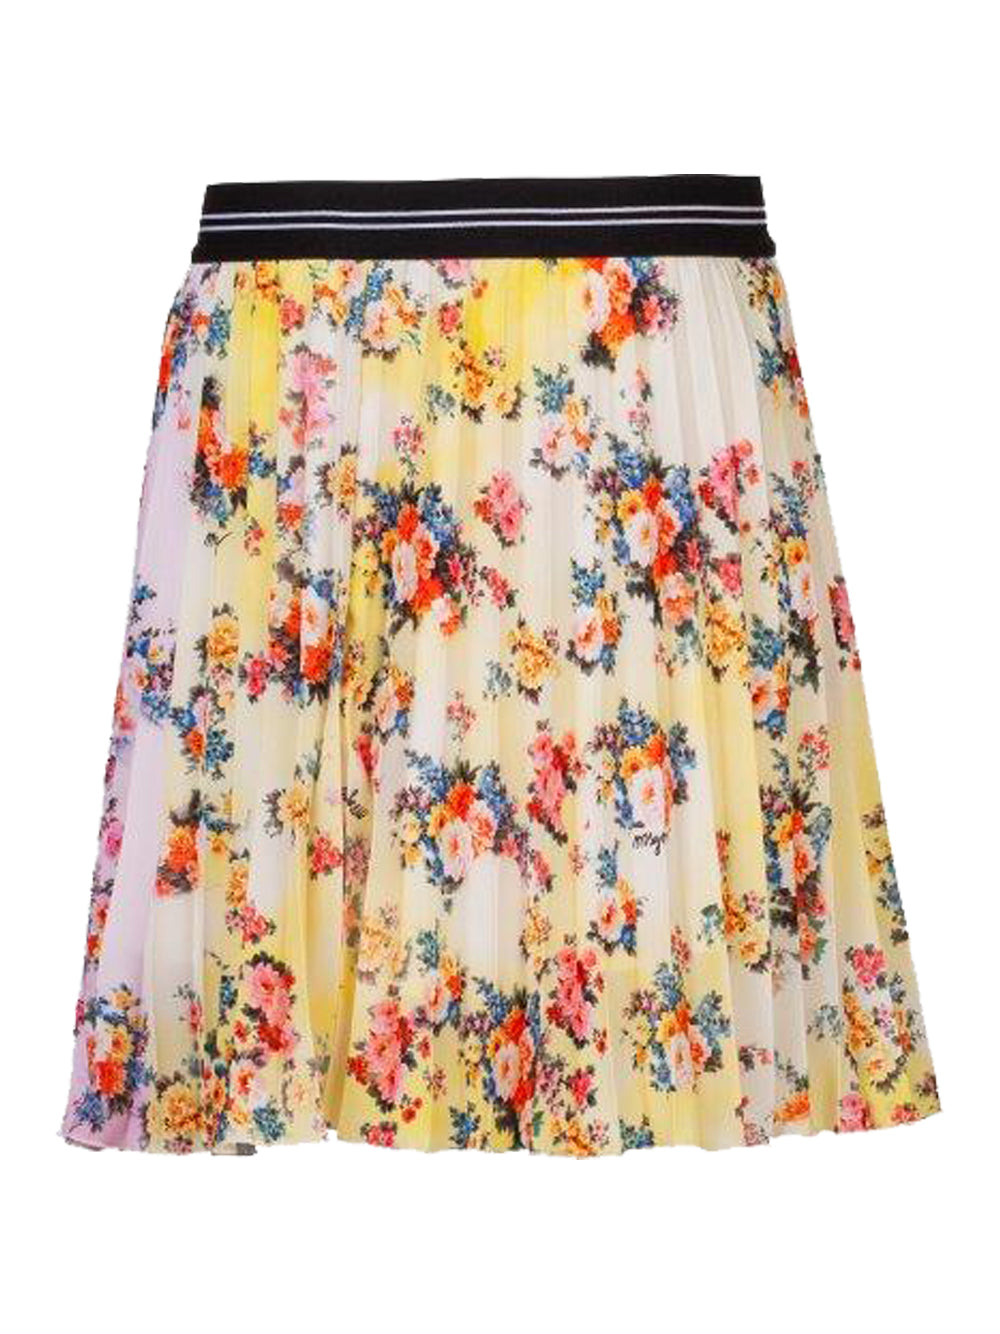 Ombre Floral Skirt